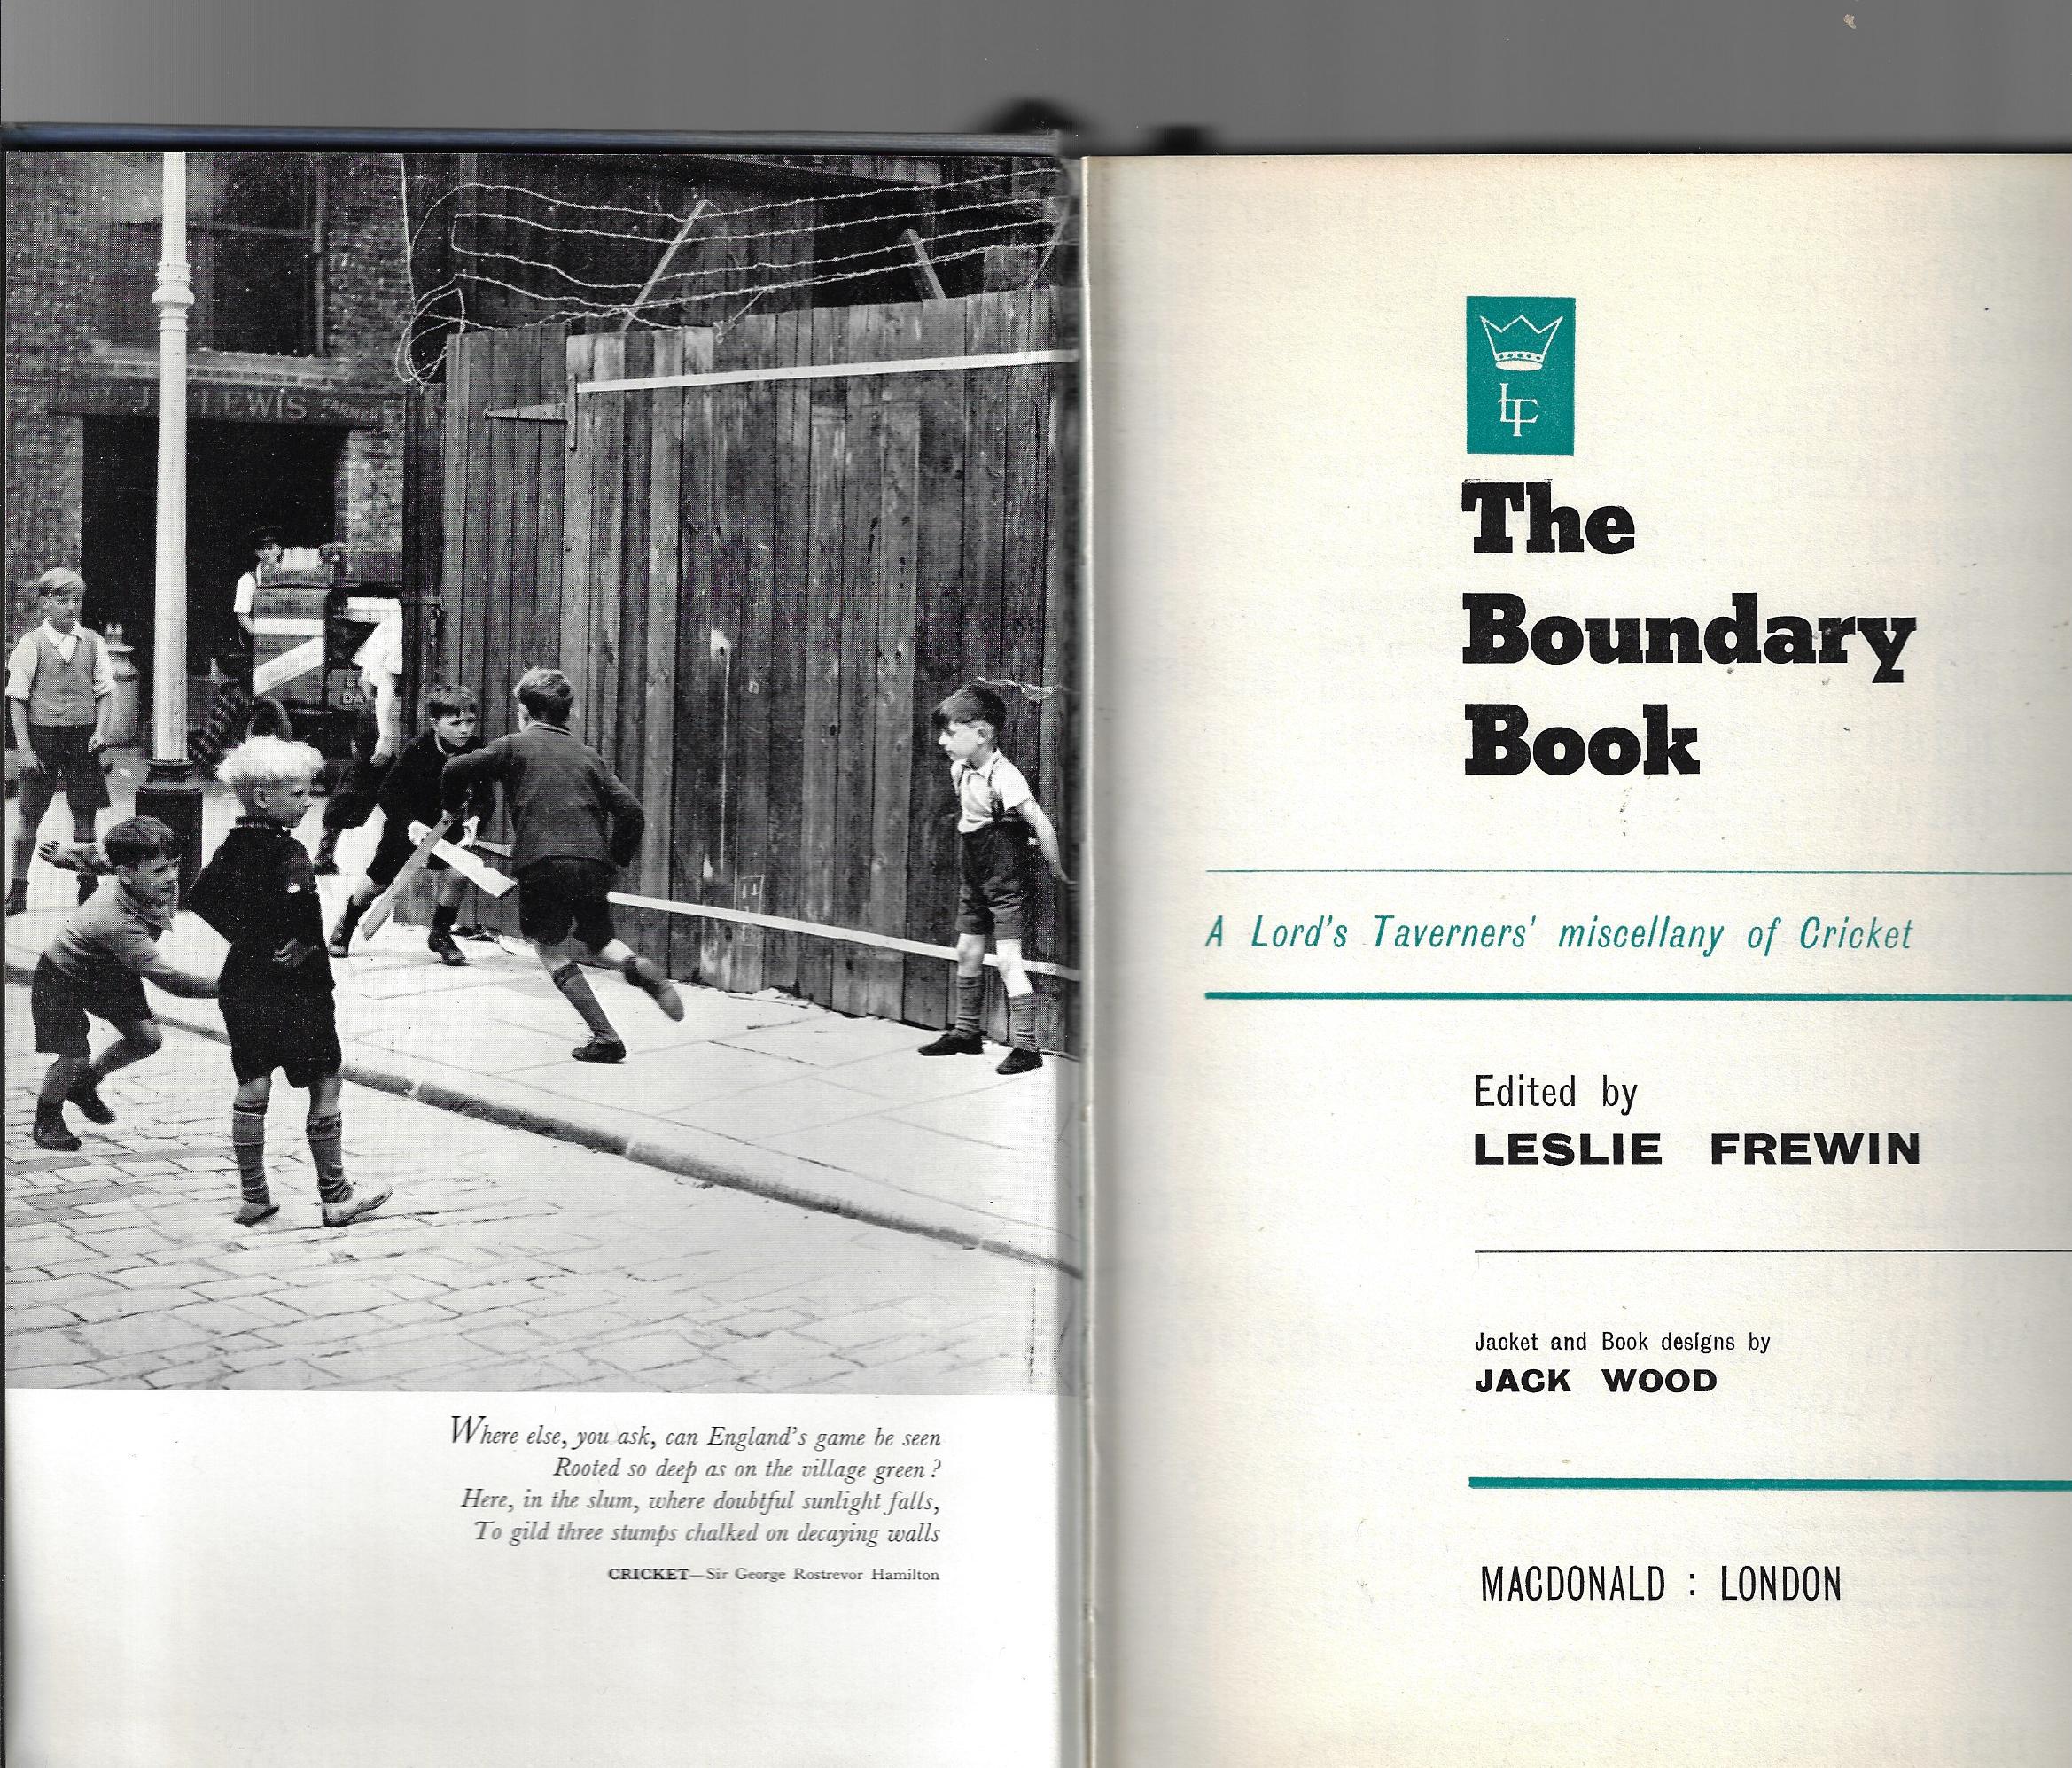 Many - The Boundary Book -A Lord's Taverners' miscellany of Cricket